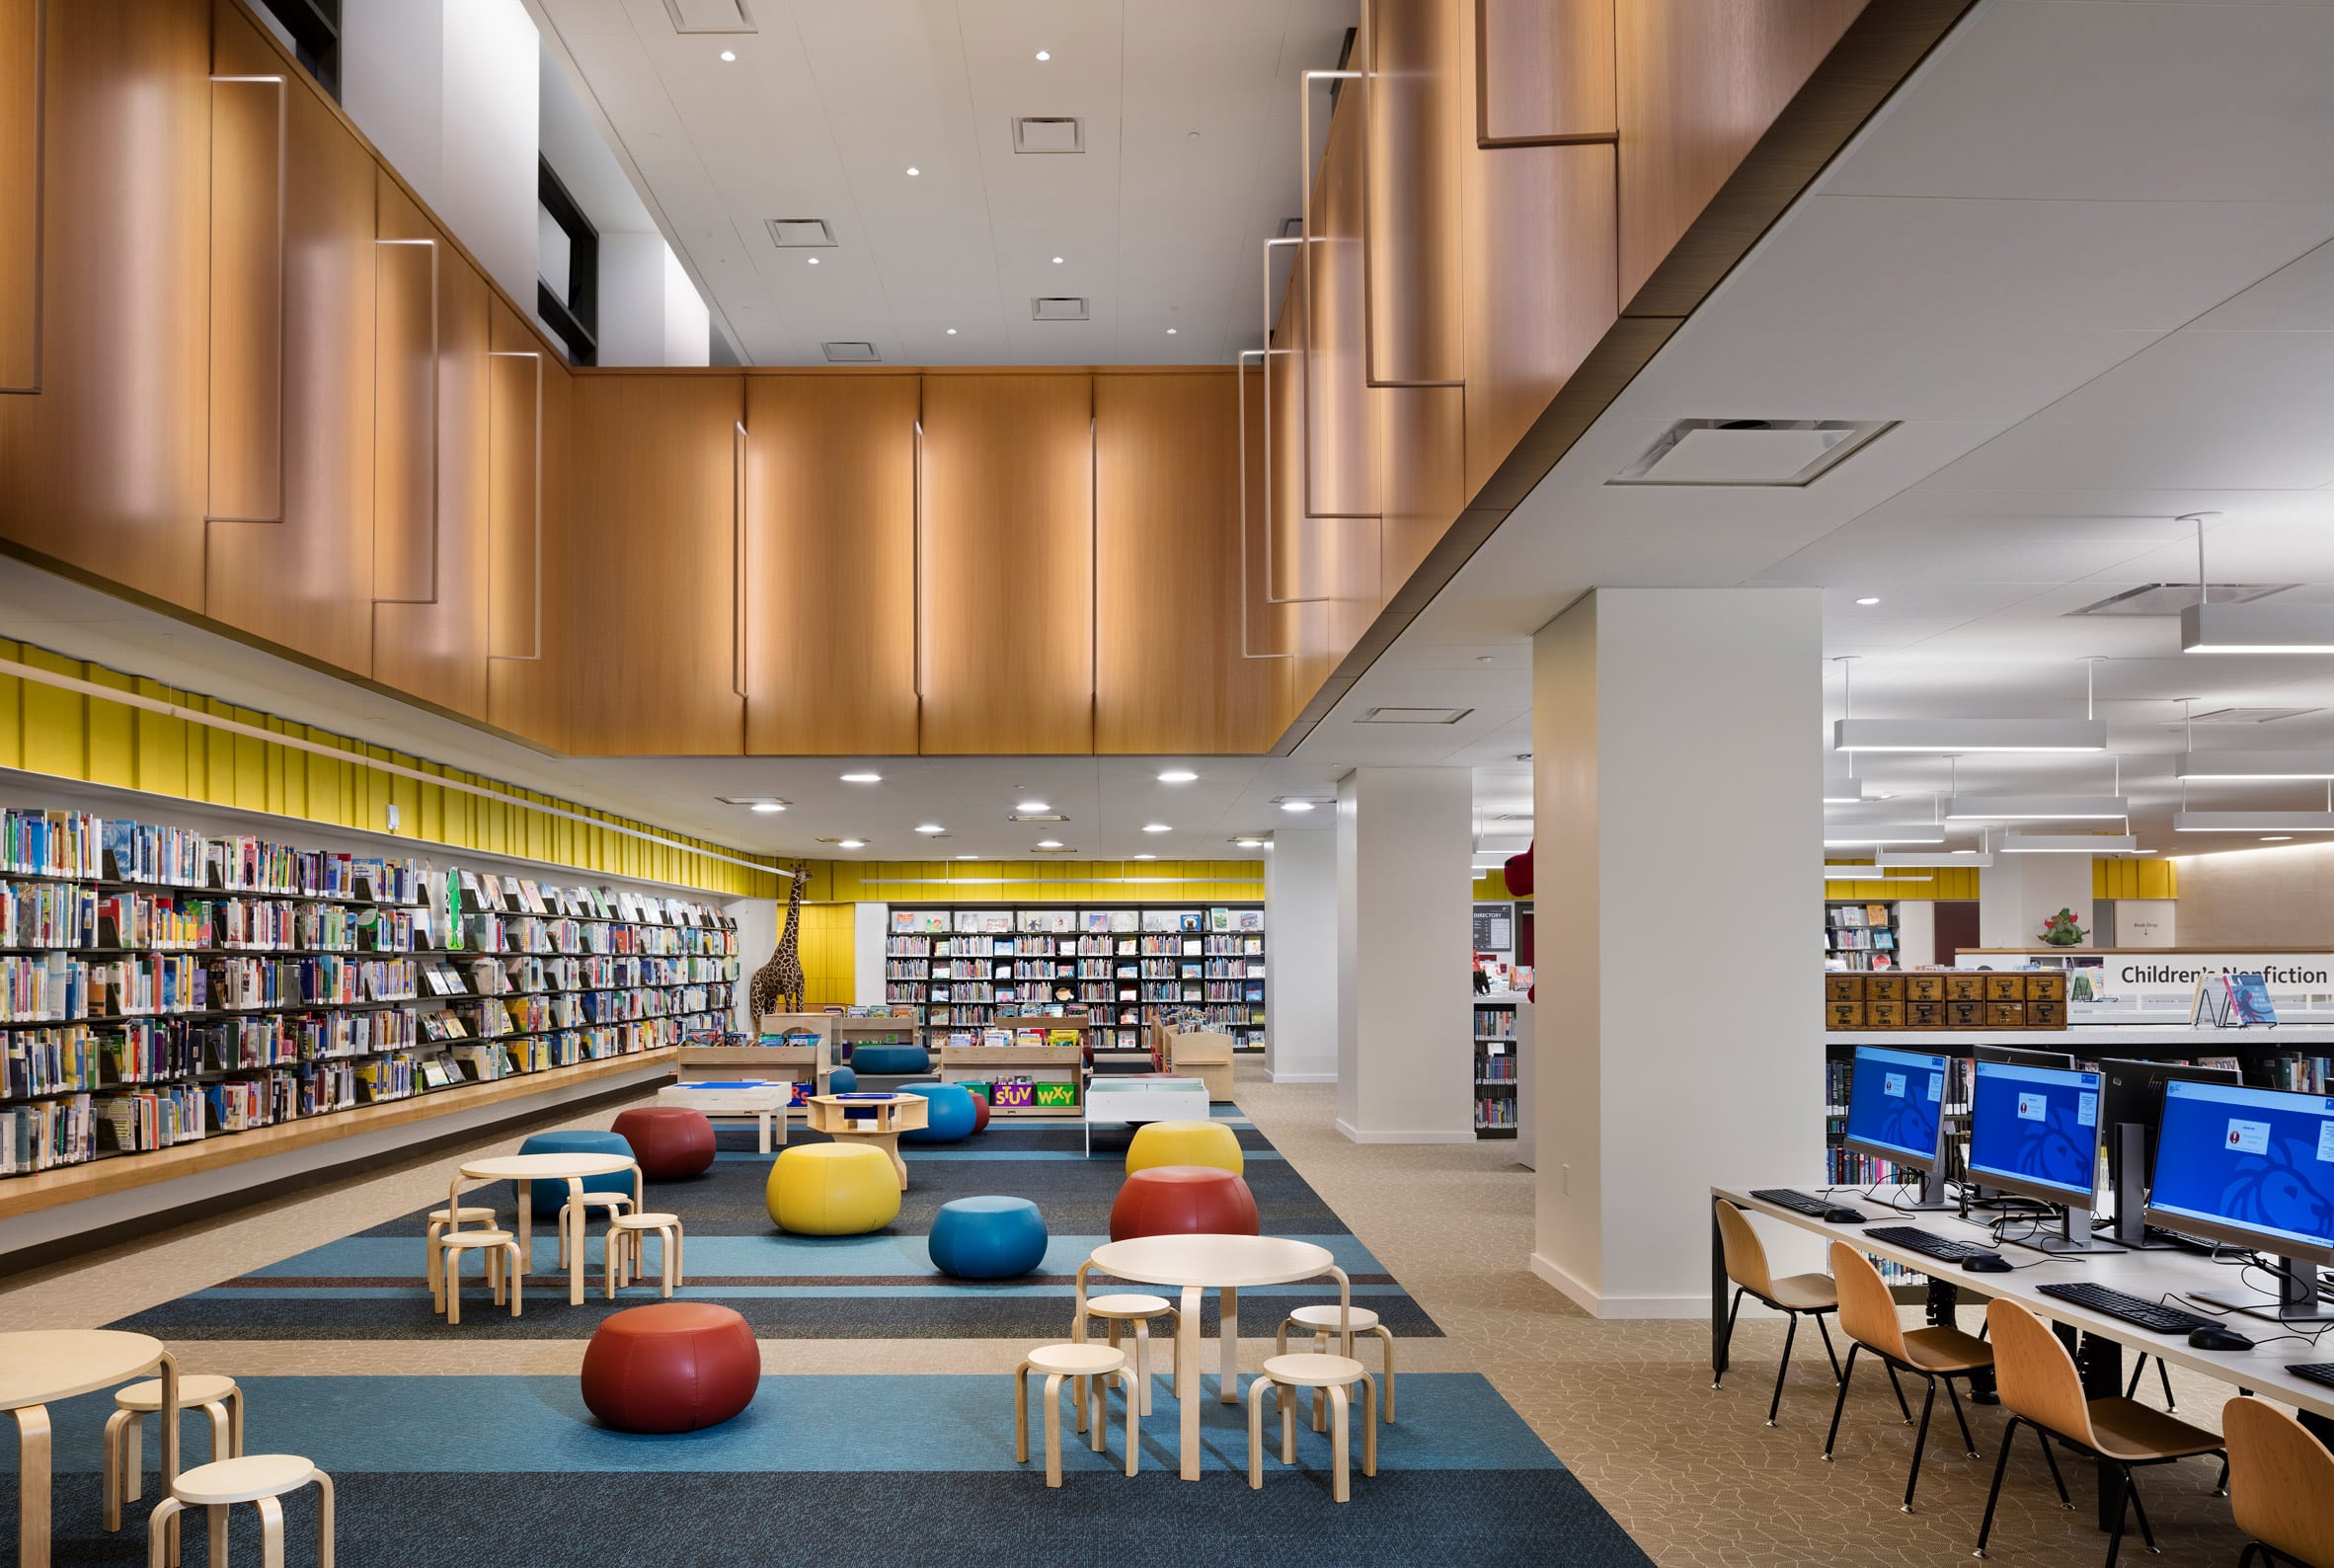 The Children's Library and Teen Centre in the Stavros Niarchos Foundation Library